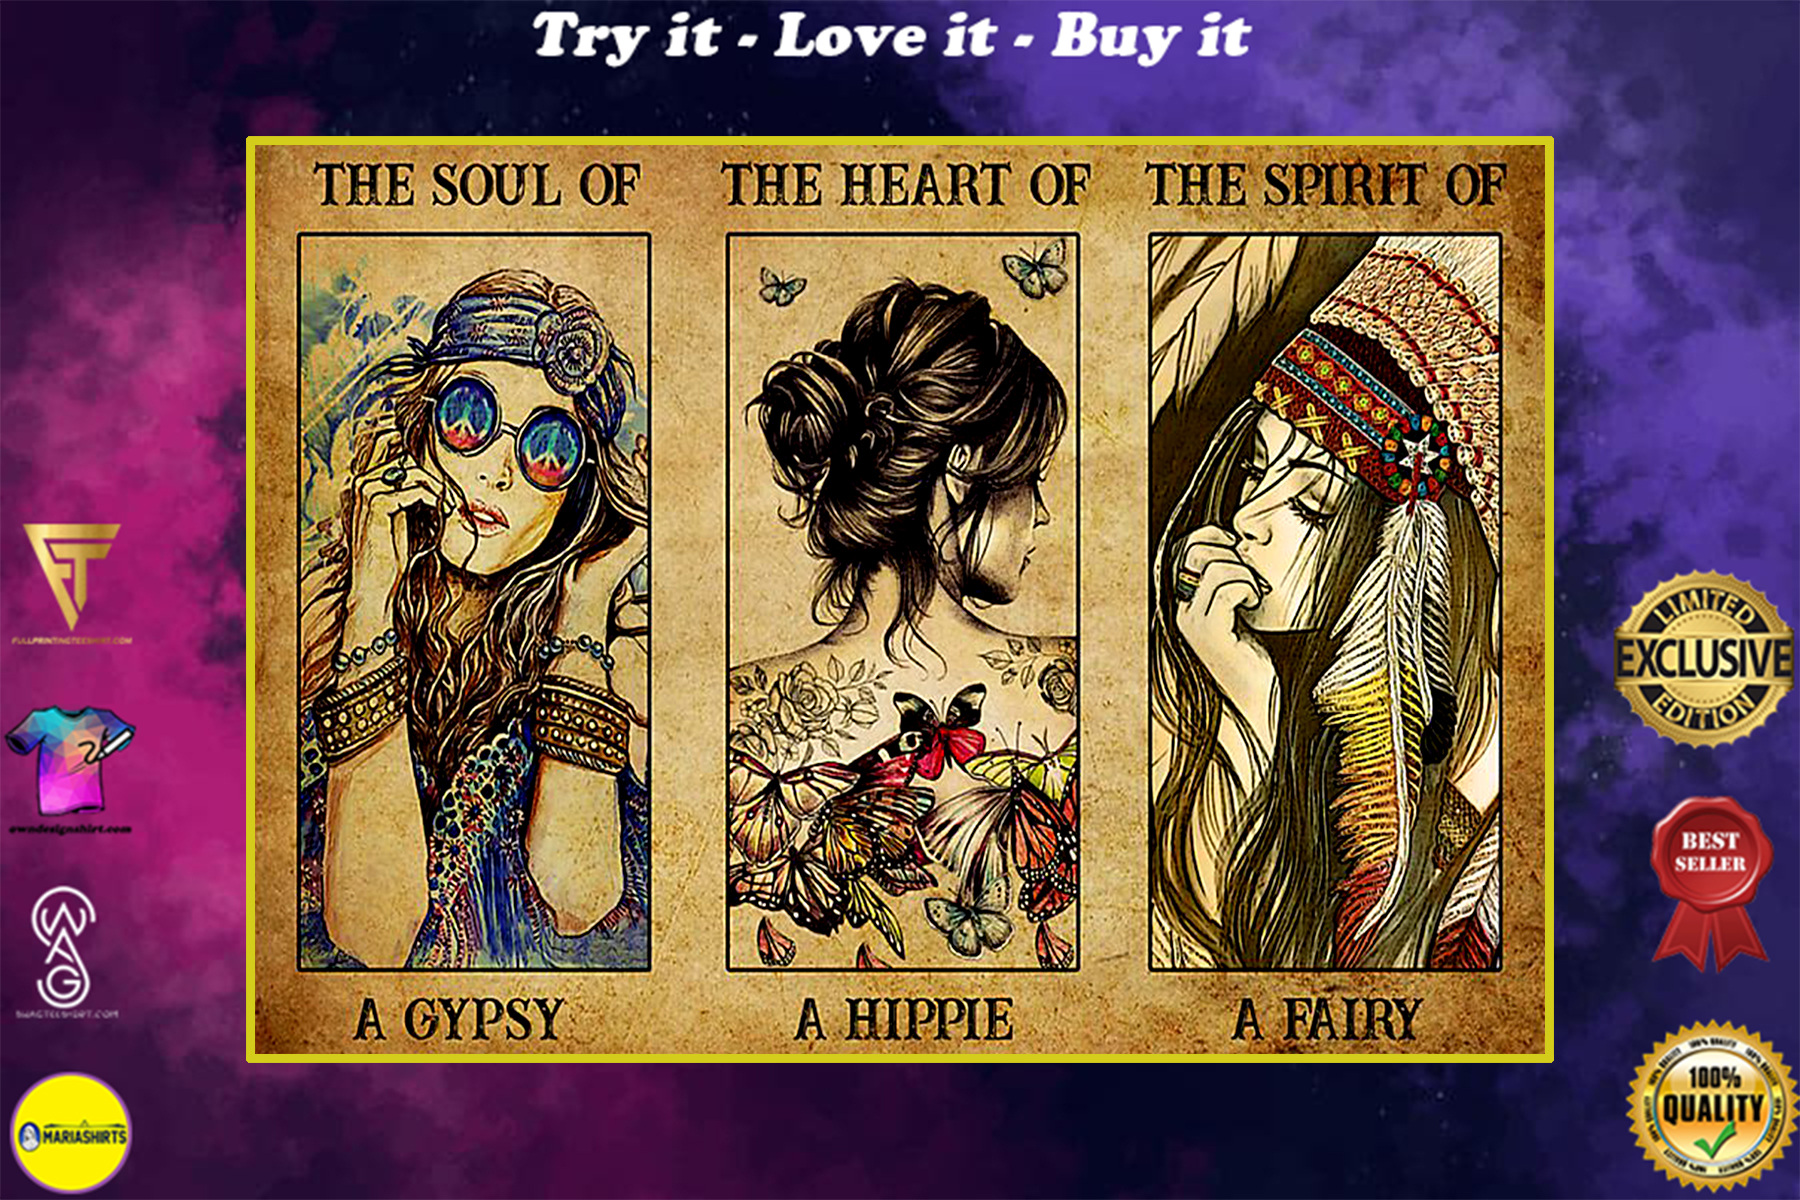 vintage the soul of a gypsy the heart of a hippie the spirit of a fairy poster